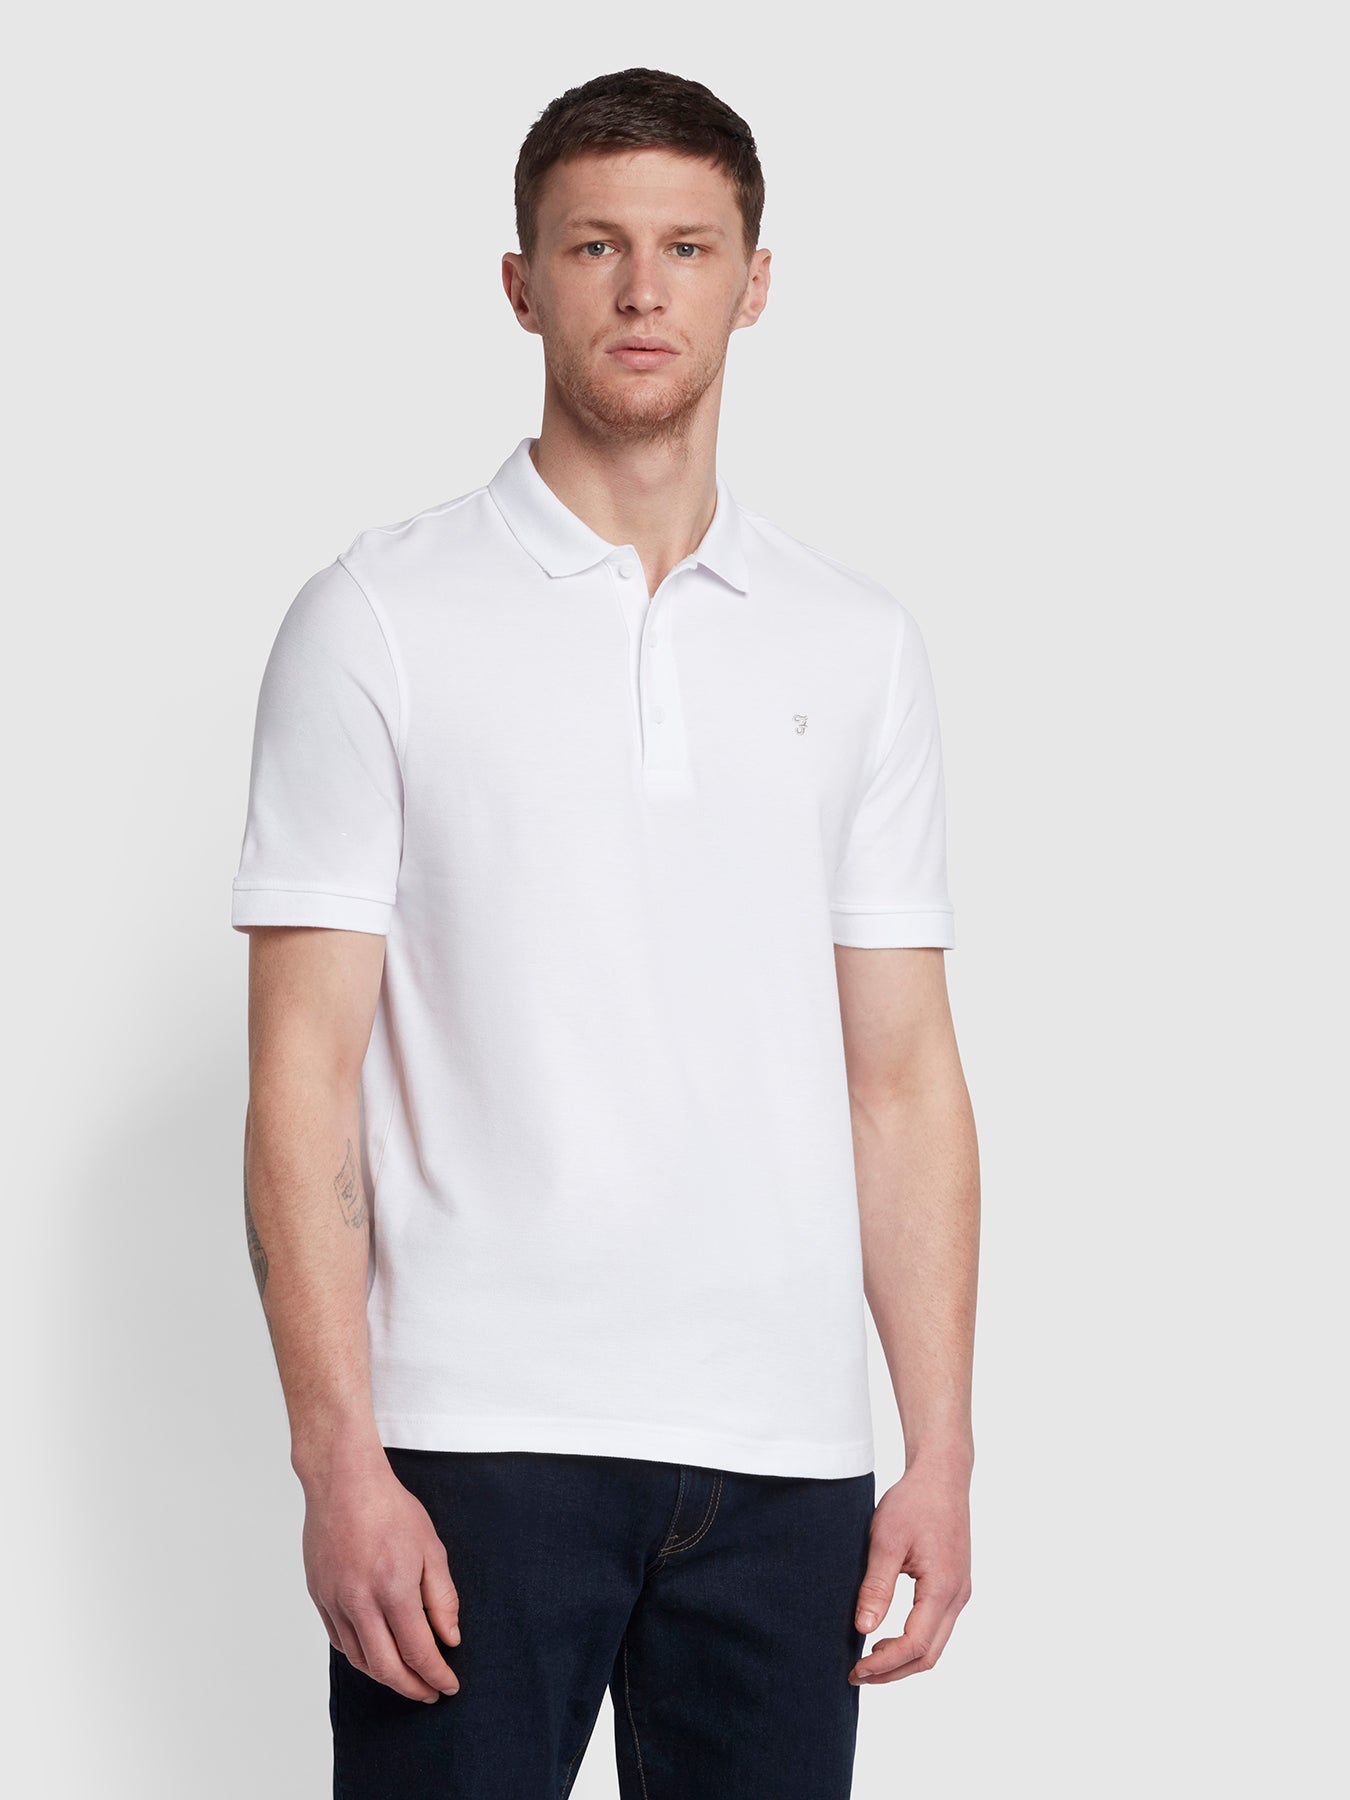 View Cove Short Sleeve Polo Shirt In White information